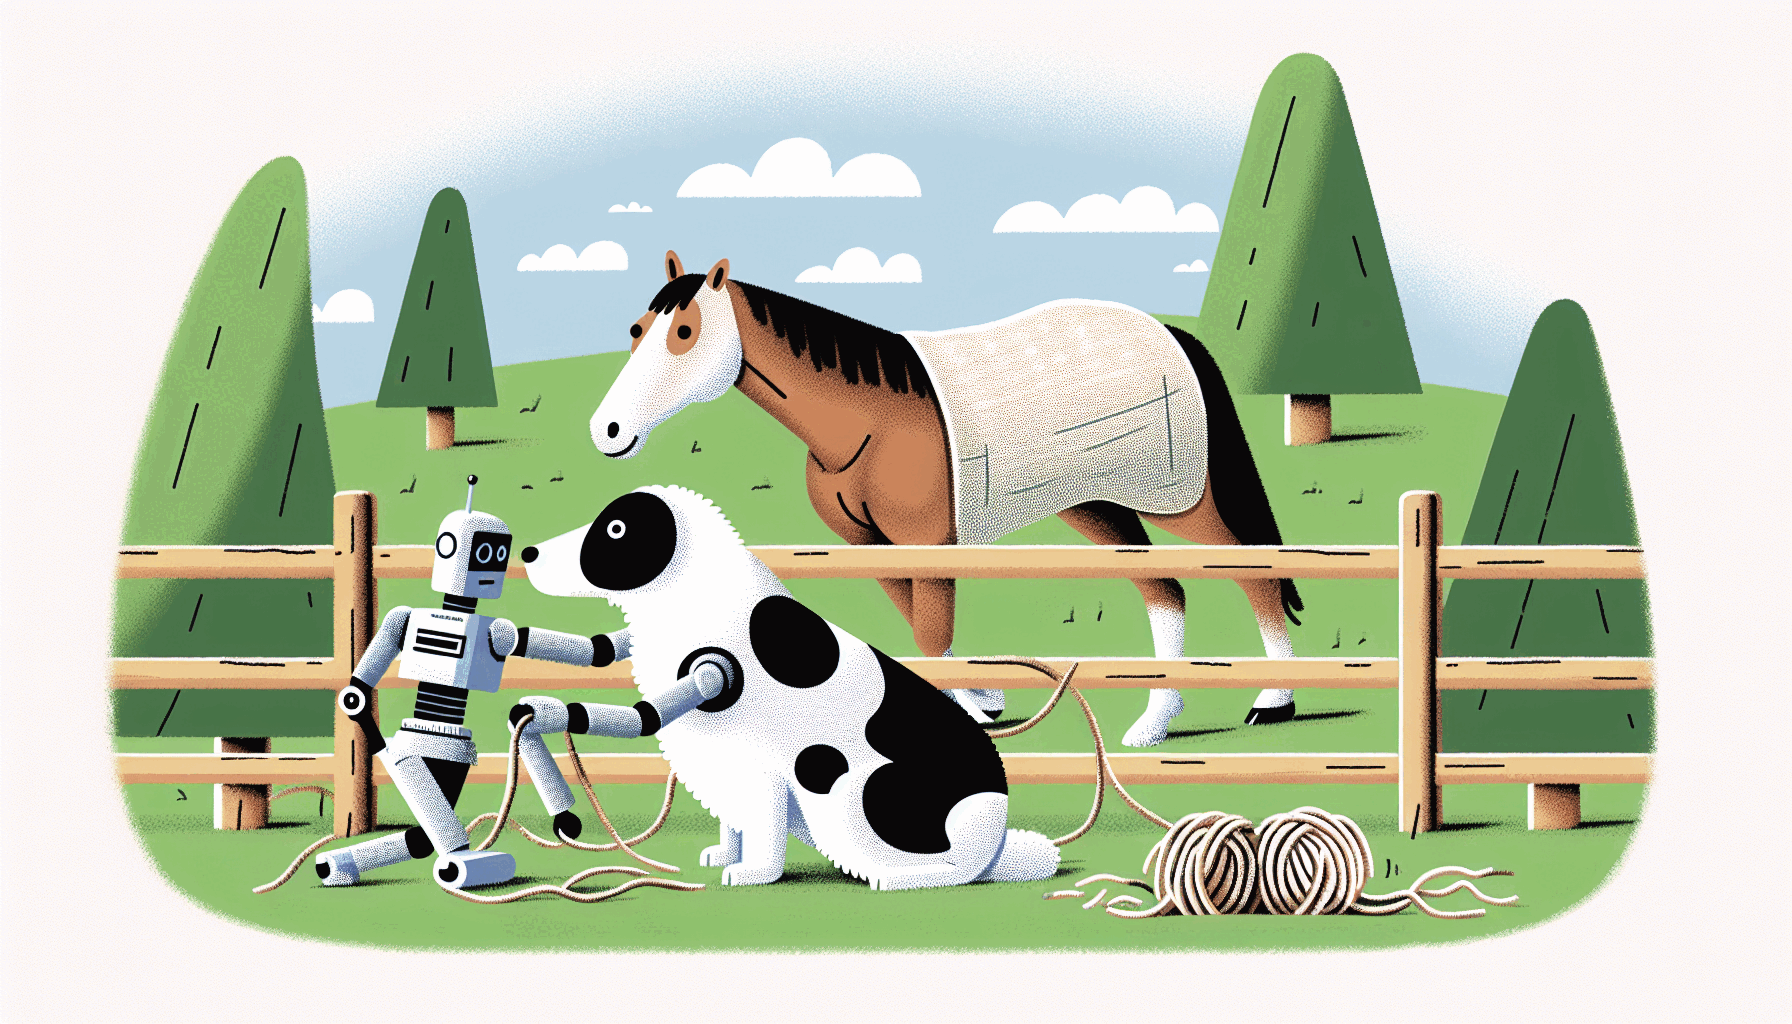 Explainable AI alone is still not as effective as well-trained domestic animals.